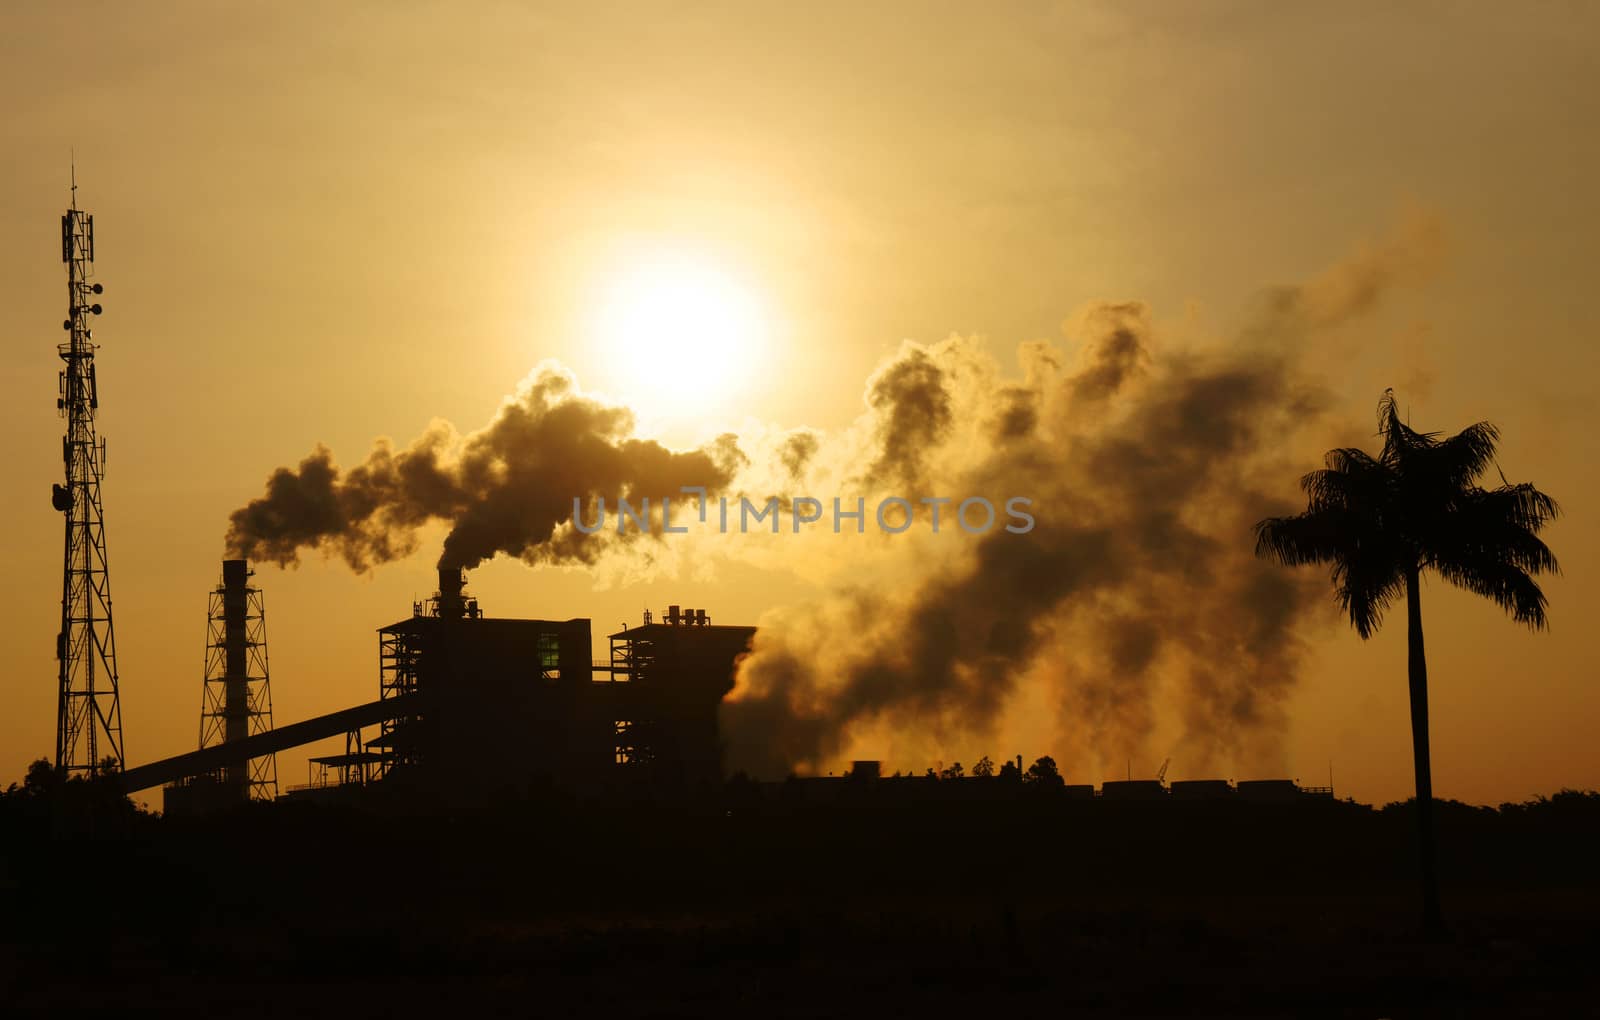 Black smoke from smoke stack of factory in industrial zone rose in to the air, it make polluted enviroment, the plant and tree in silhouette at sunrise, atmosphere cover with waste exhaust